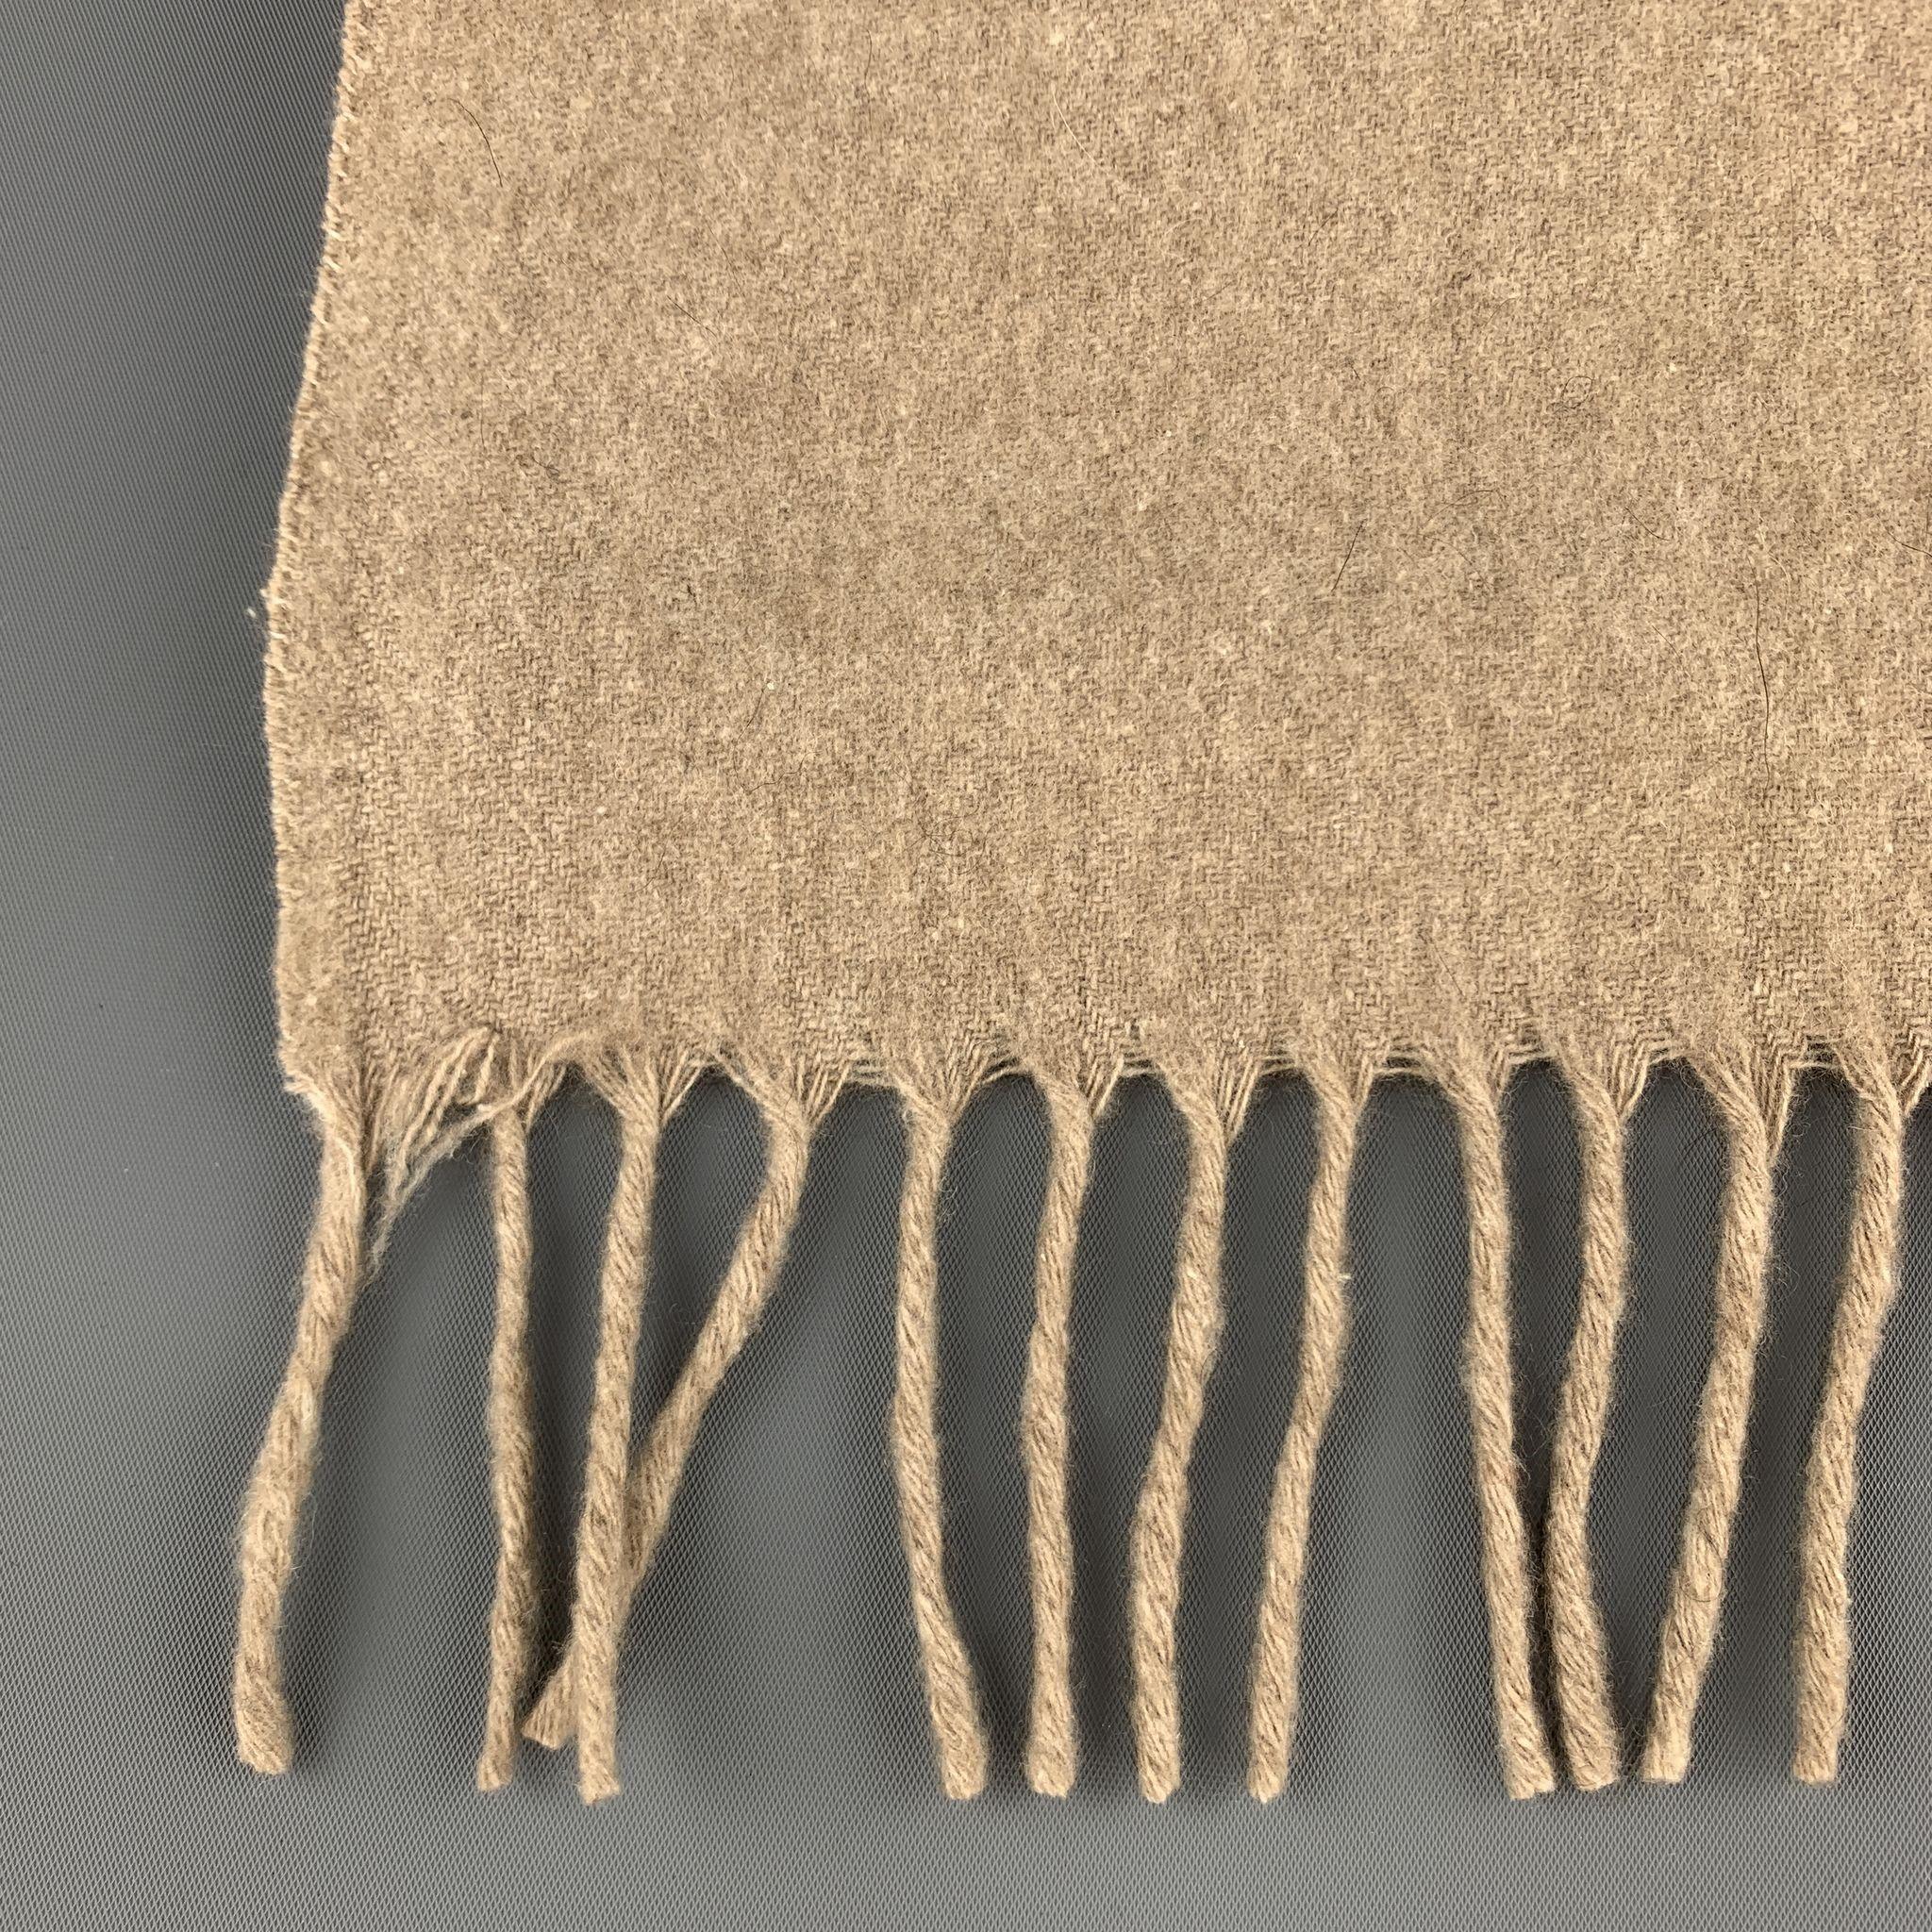 AMICALE winter scarf comes in taupe cashmere with two and a quarter inch fringe trim. 

Very Good Pre-Owned Condition.

28 x 13 in.